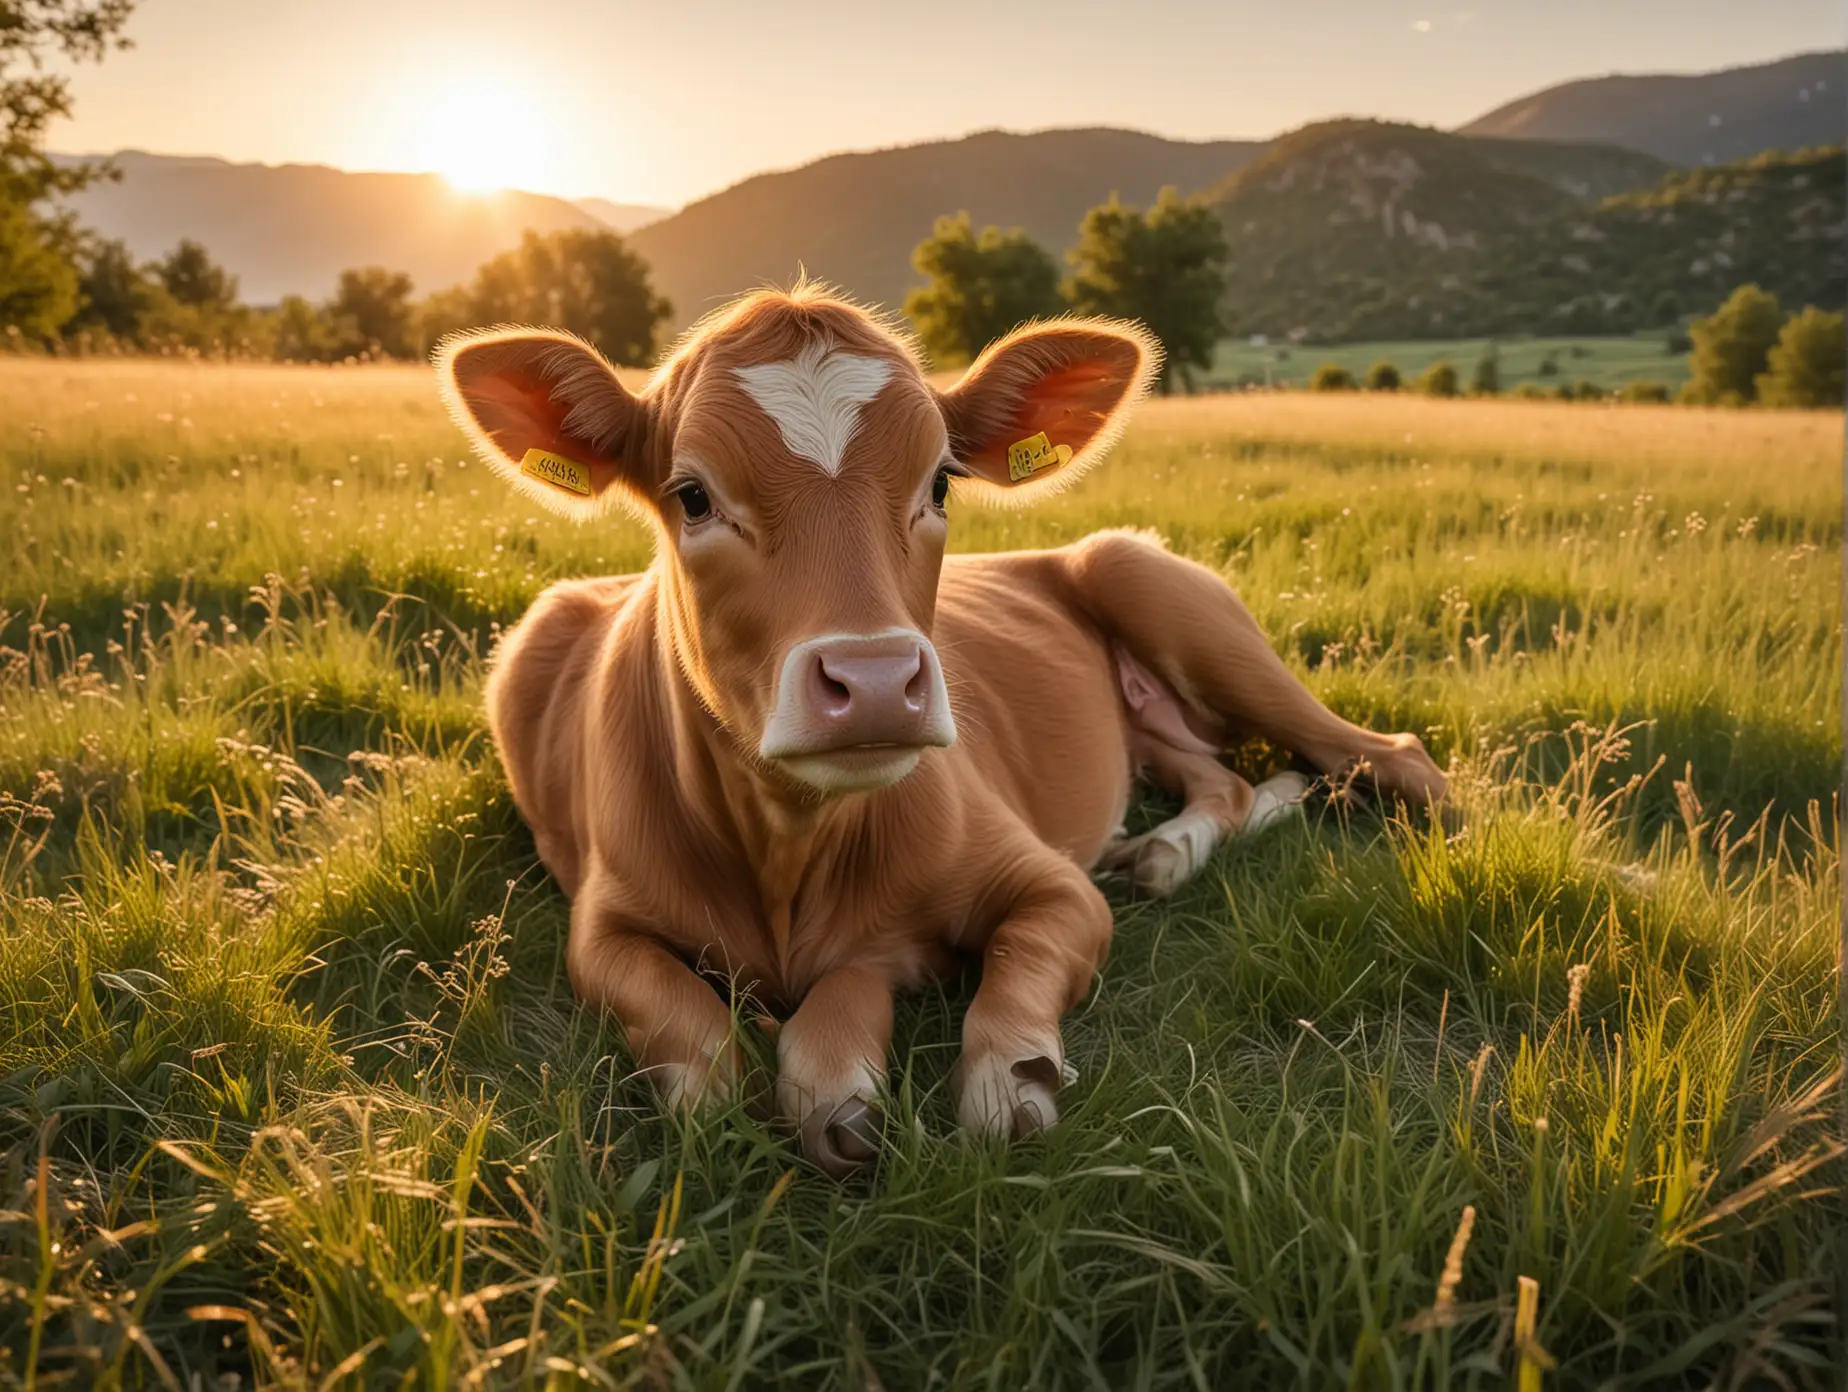 light brown newborn calf laying in a meadow with the valley of grass and trees fading behind him into the warm sunset